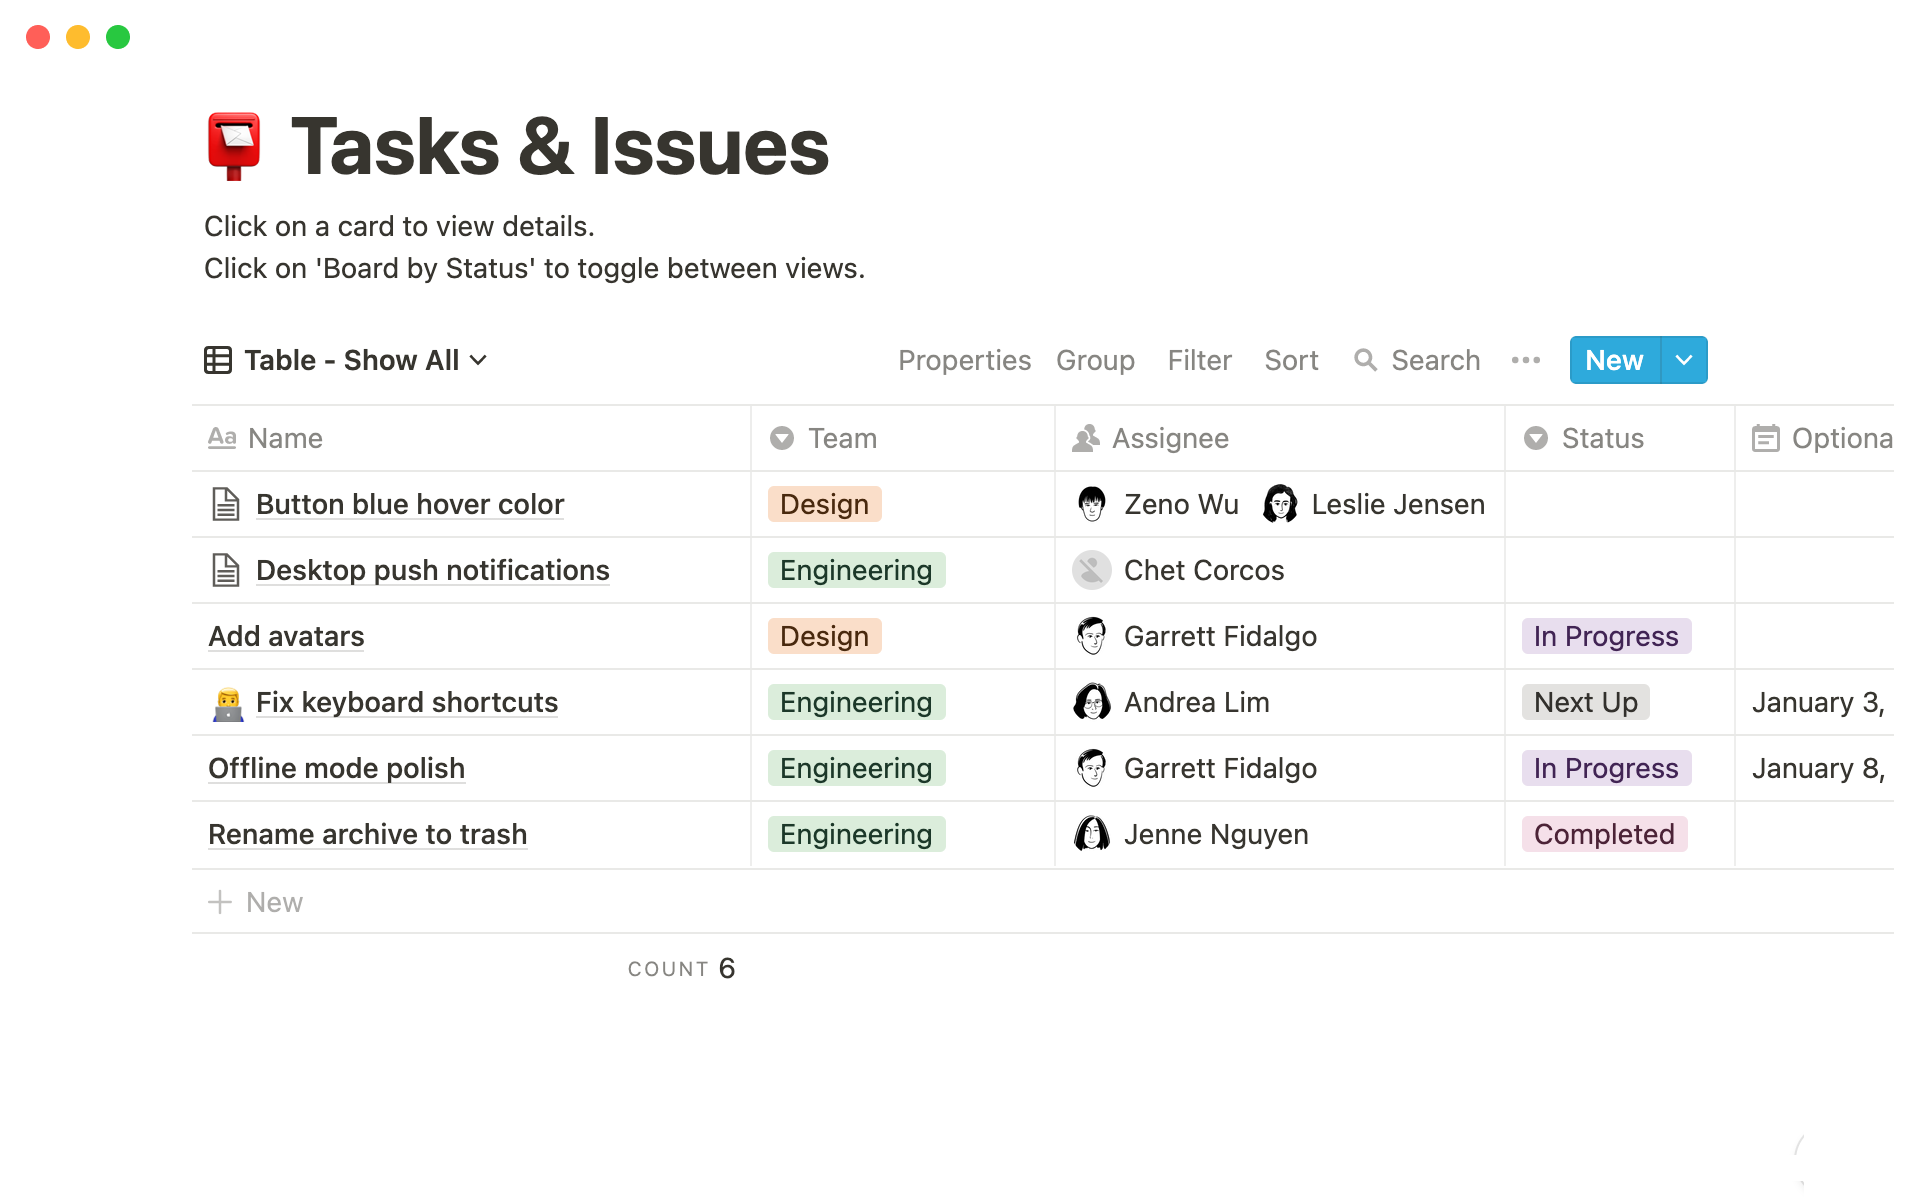 Manage your whole team's projects and issues, from task creation to completion.